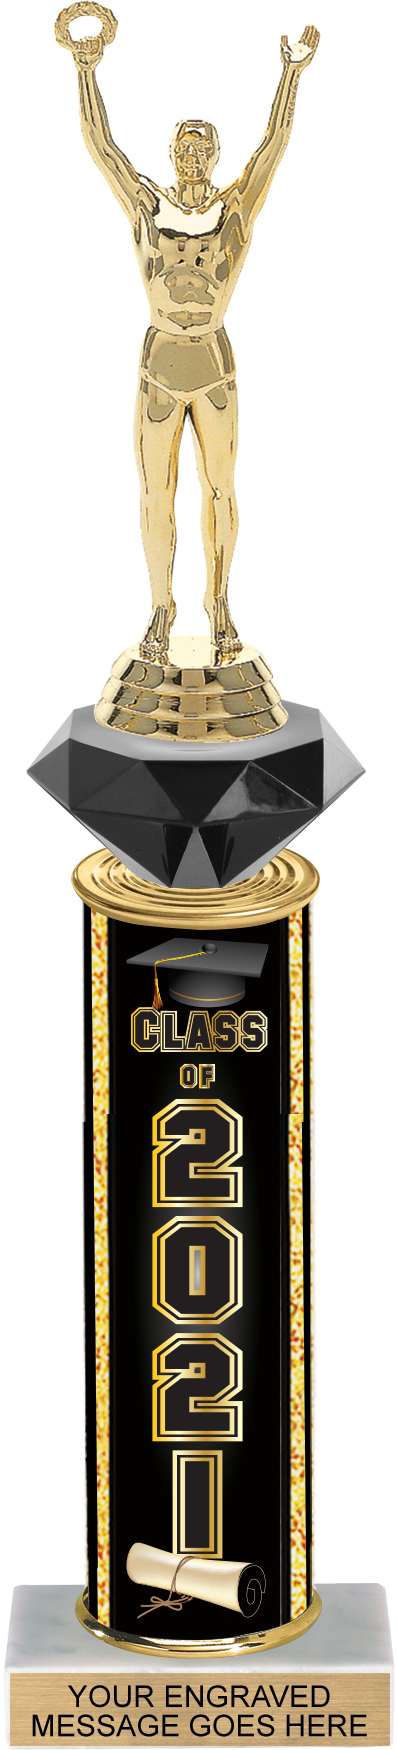 Diamond Riser Trophy with Class of 2021 Column - 13 inch